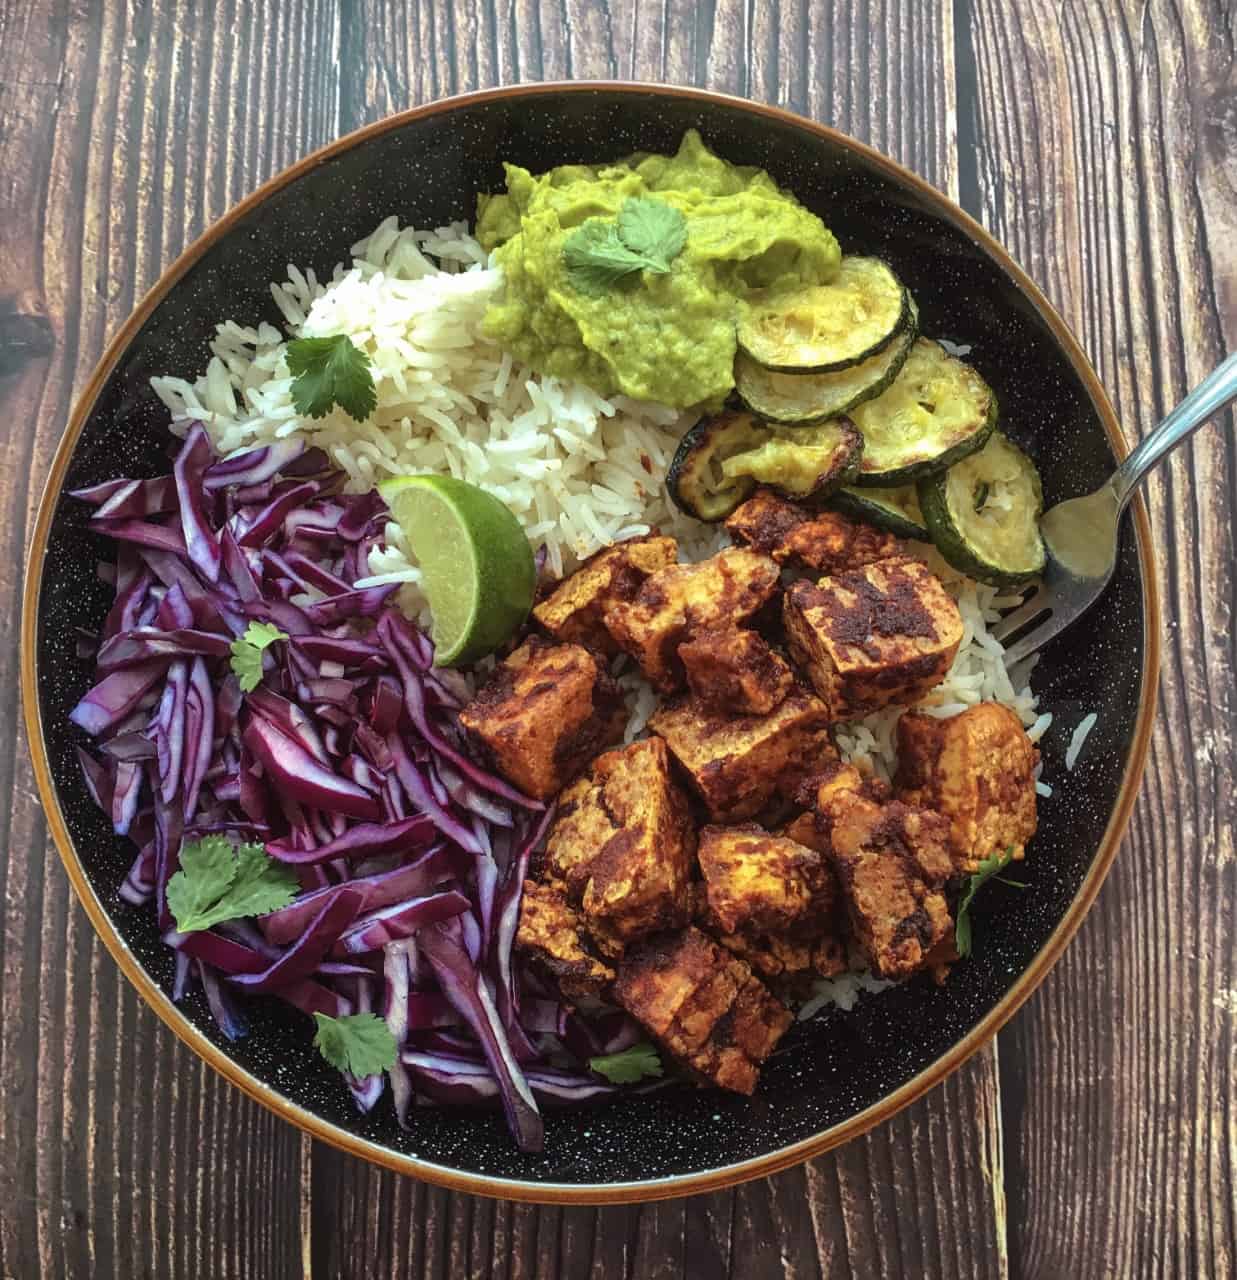 Tofu Bowl with lots of fried veg and red cabbage